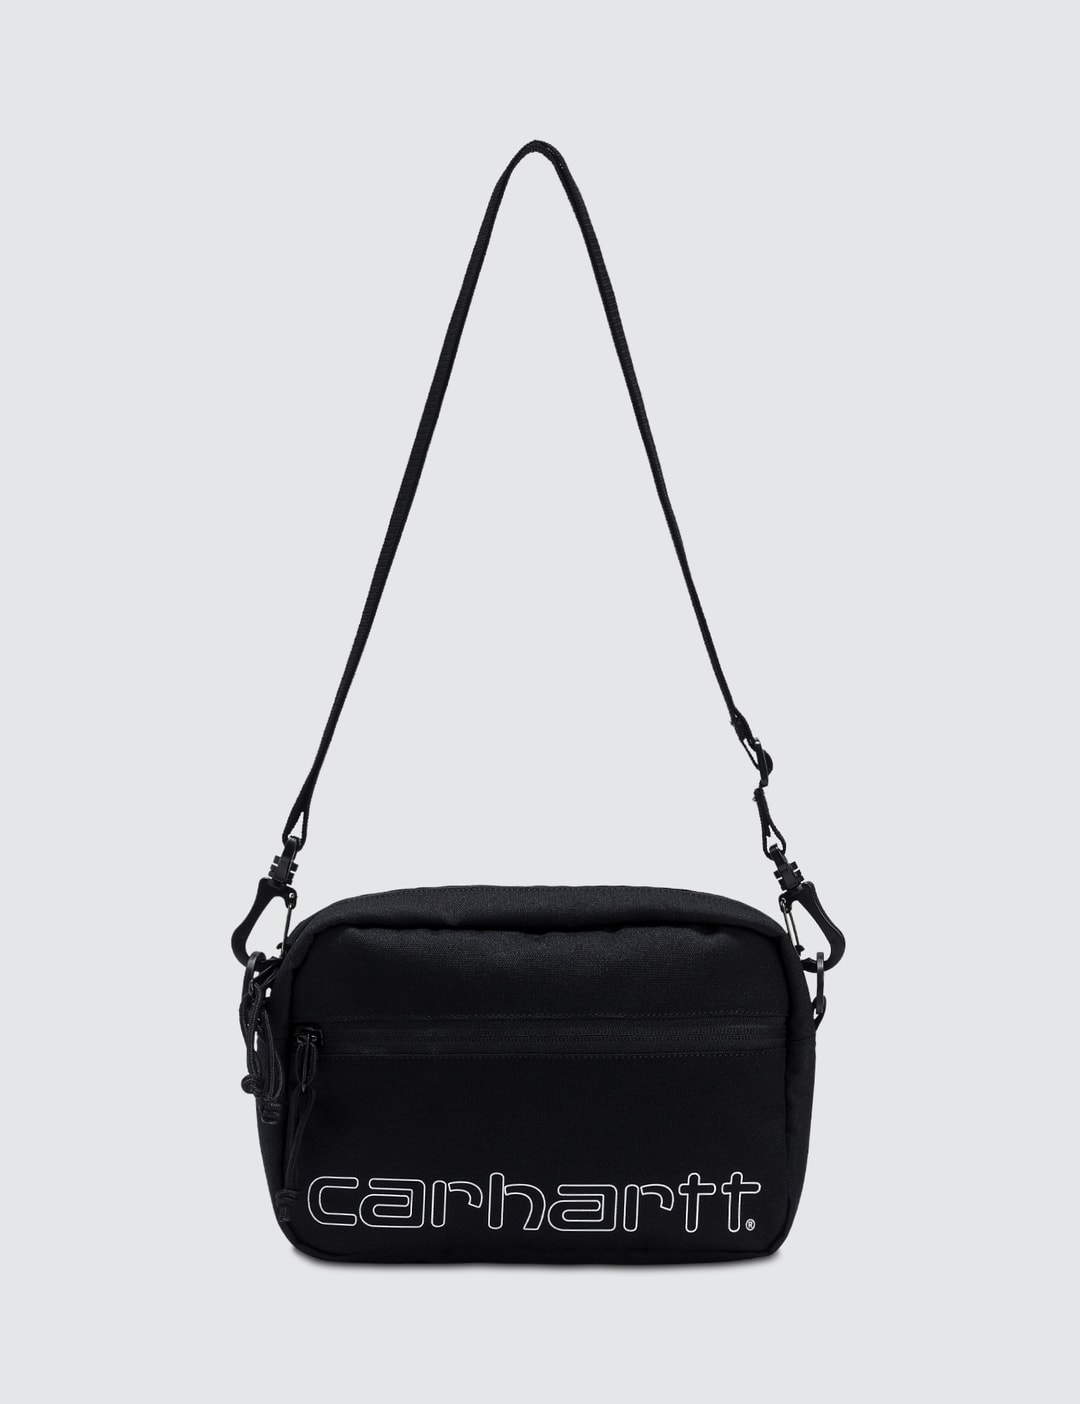 Carhartt Work In - Team Script Bag | HBX - Globally Curated Fashion and Lifestyle by Hypebeast